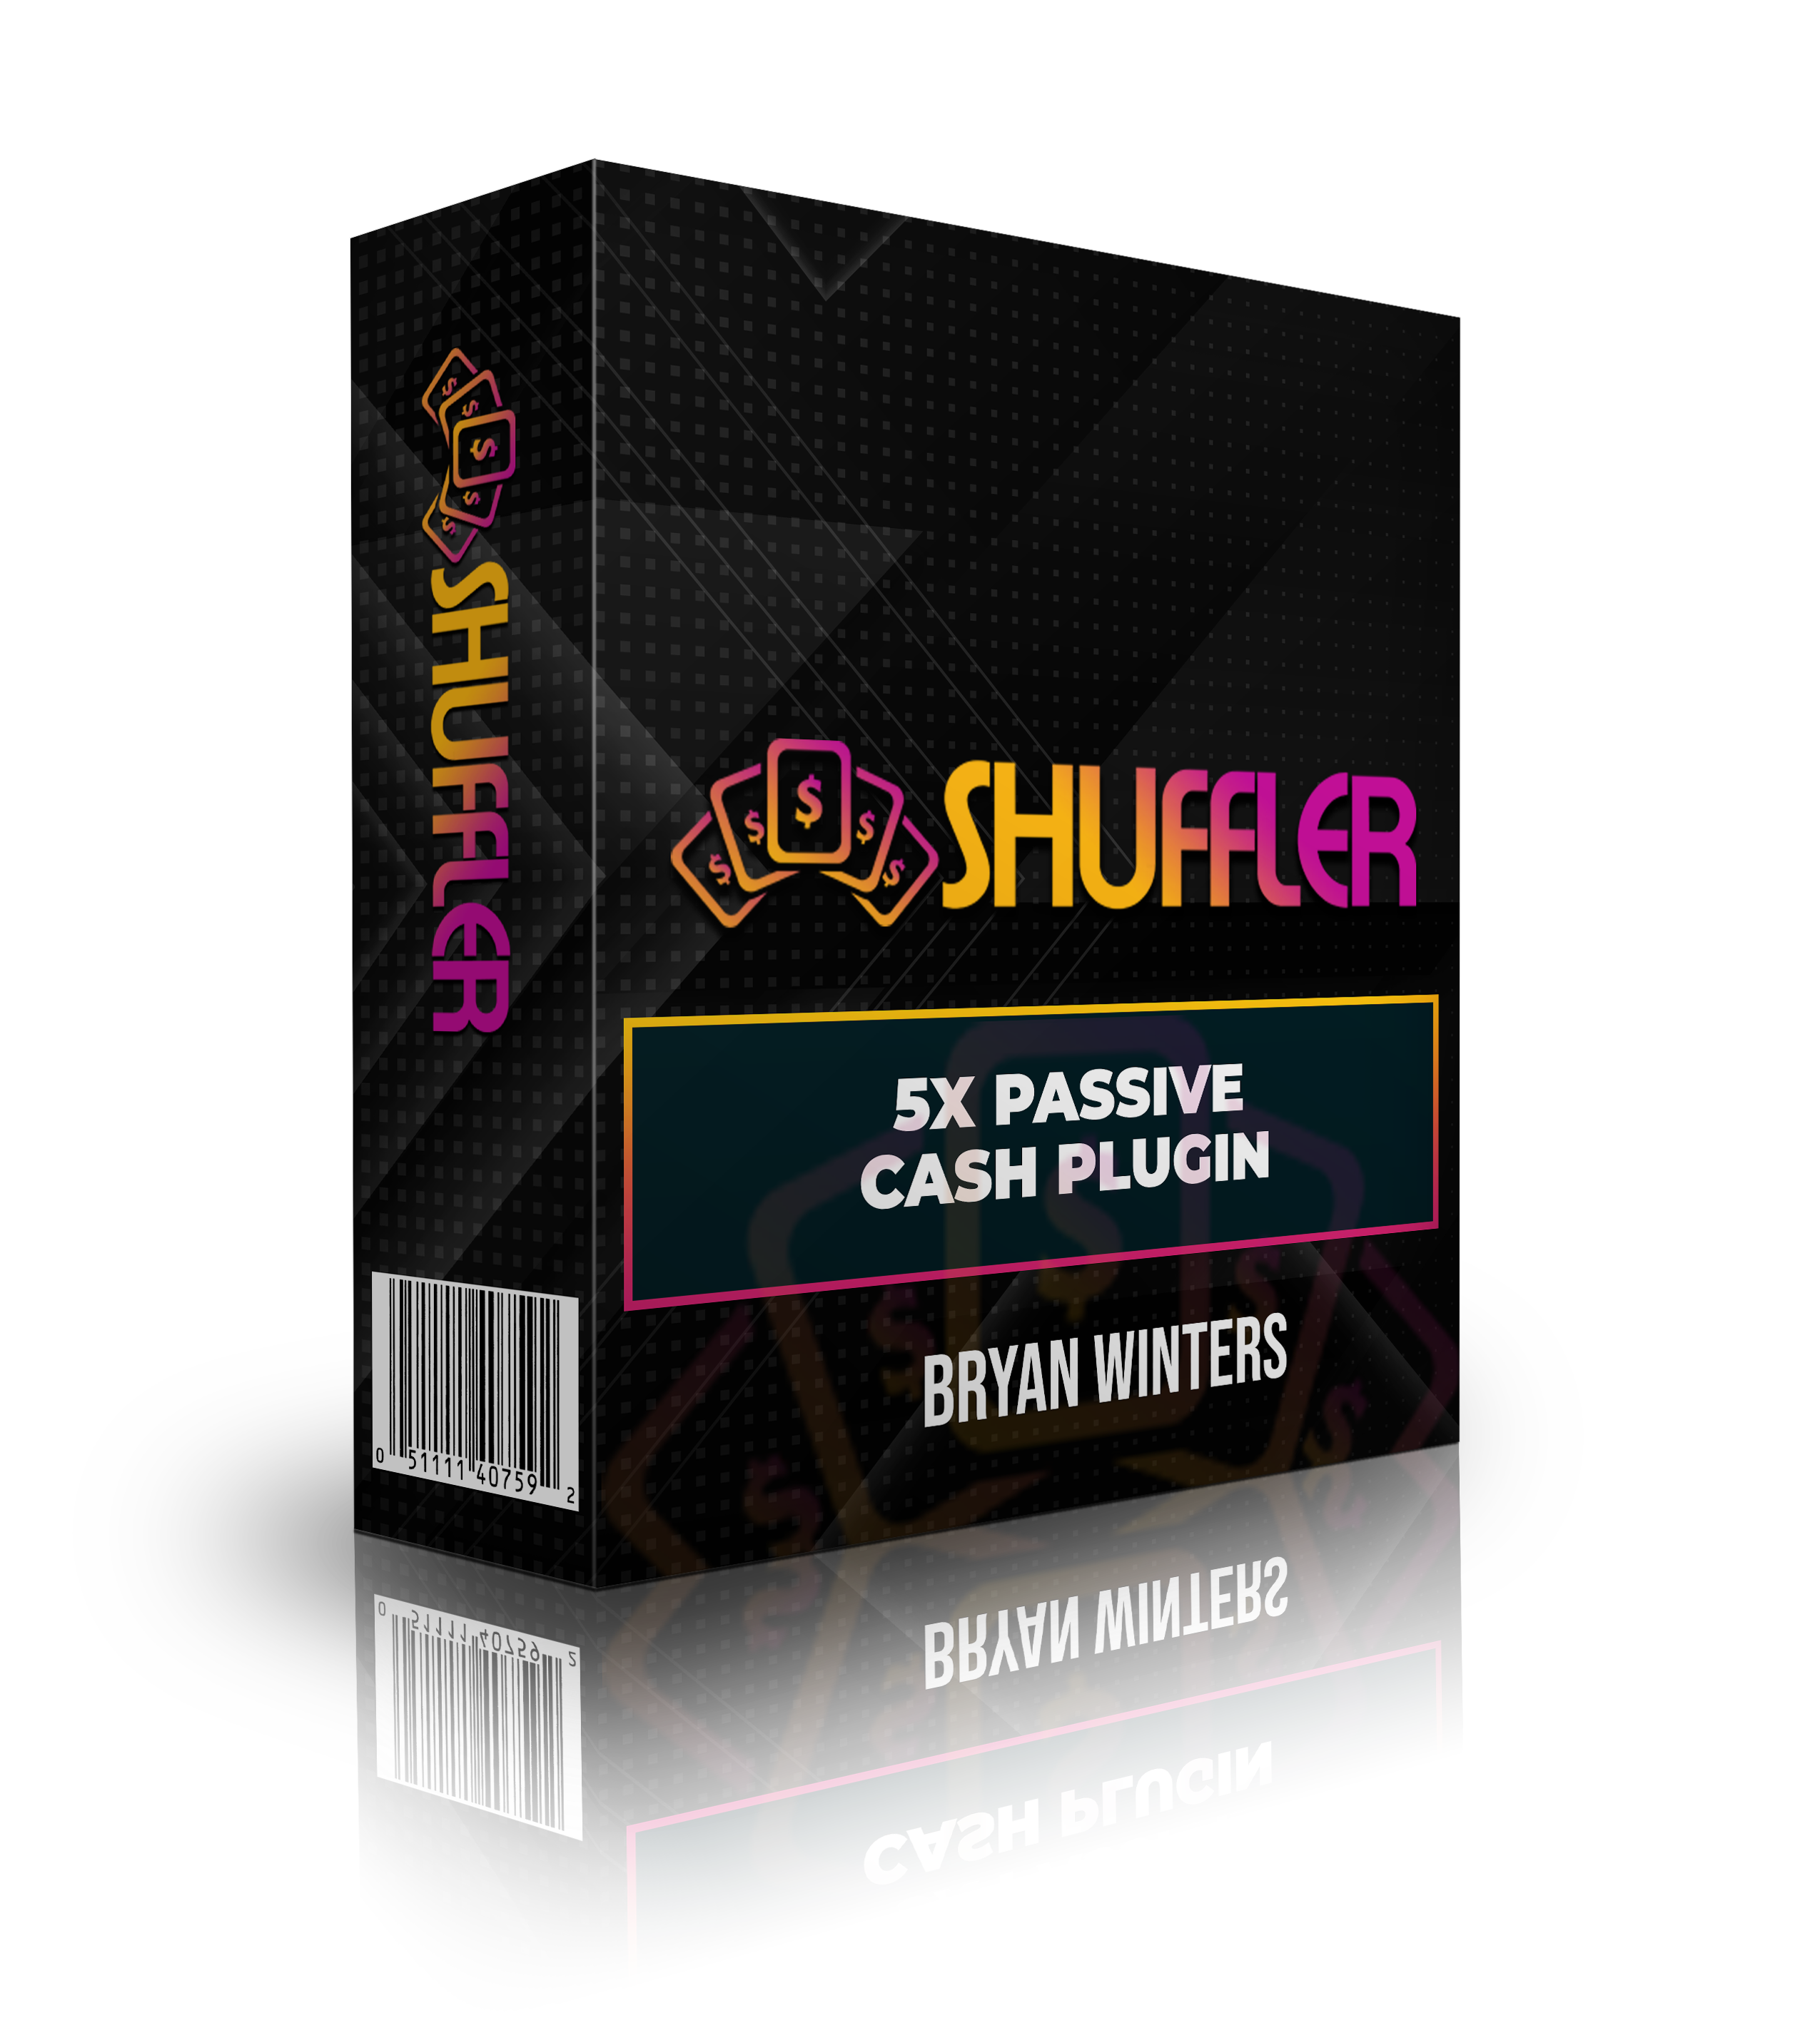 OTO 4 - SHUFFLER'S 5X PASSIVE CASH PLUGIN - $97 With $67 Downsell. Our "5X Passive Cash Plugin" virtually guarantees its takers more income with SHUFFLER... We've placed FIVE 6-figure affiliate offers inside all SHUFFLER back offices (which will quickly become thousands of pages).. Our system automatically rotates our app users' affiliate links for these 5 offers across all SHUFFLER accounts, to result in literal autopilot traffic and commissions